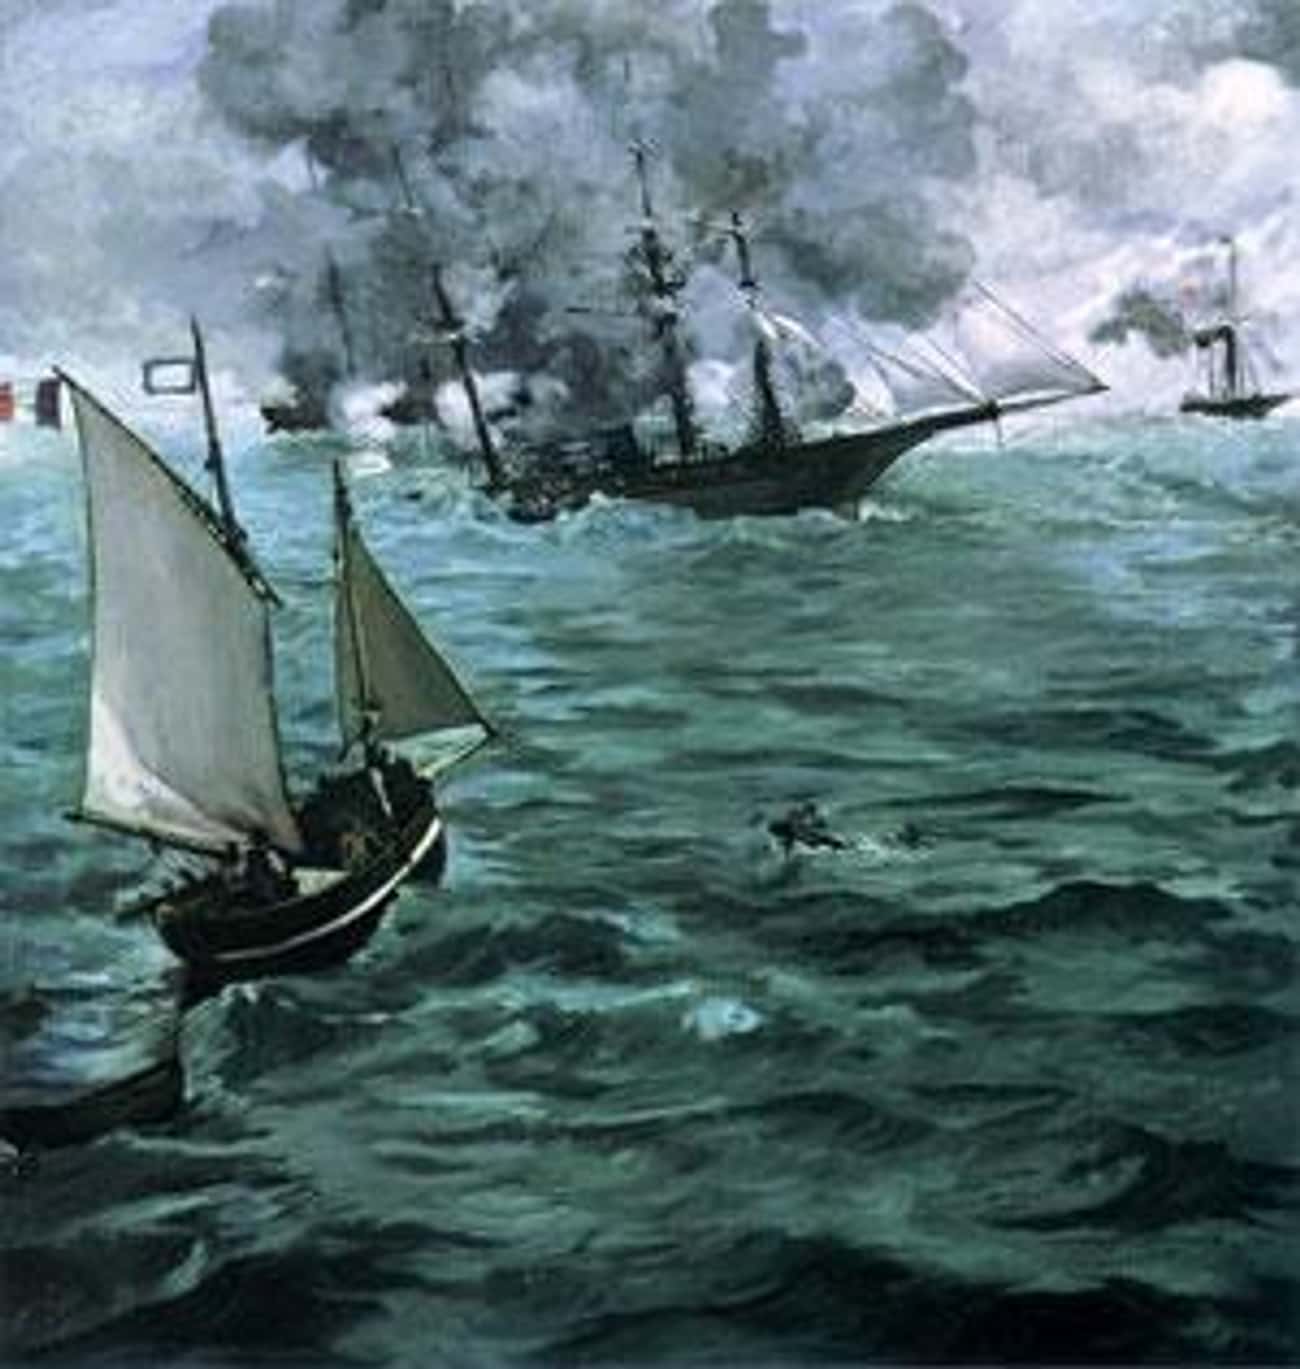 Battle of the U.S.S. Kearsarge and the C.S.S. Alabama